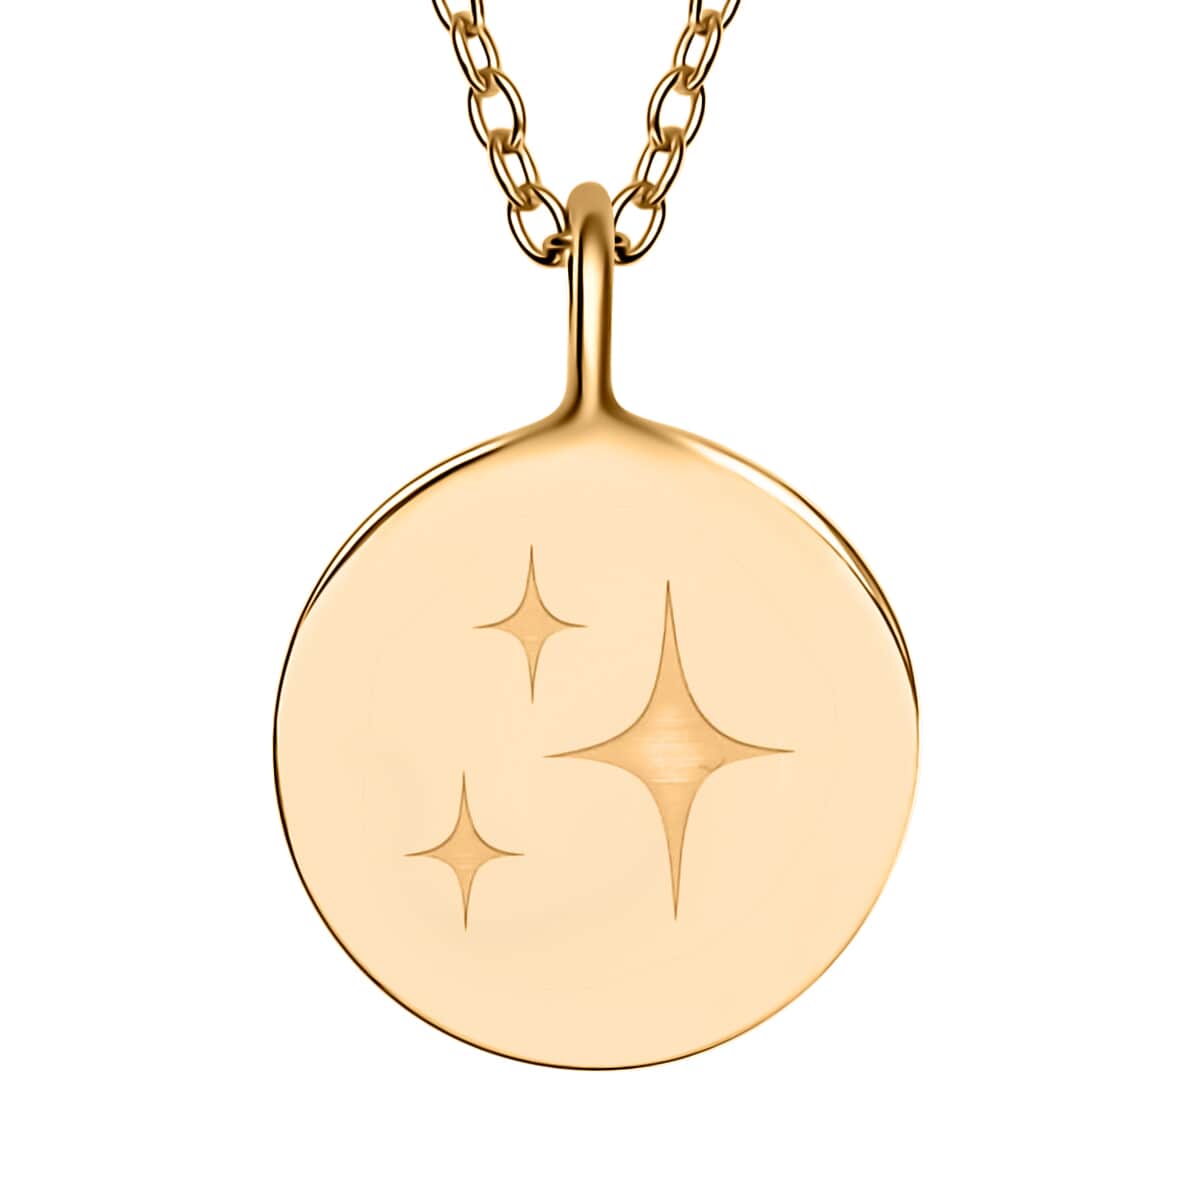 Star Sign Pendant Necklace, 16-18 Inch Adjustable Necklace, 14K Yellow Gold Over Sterling Silver Pendant Necklace 4.10 Grams image number 2